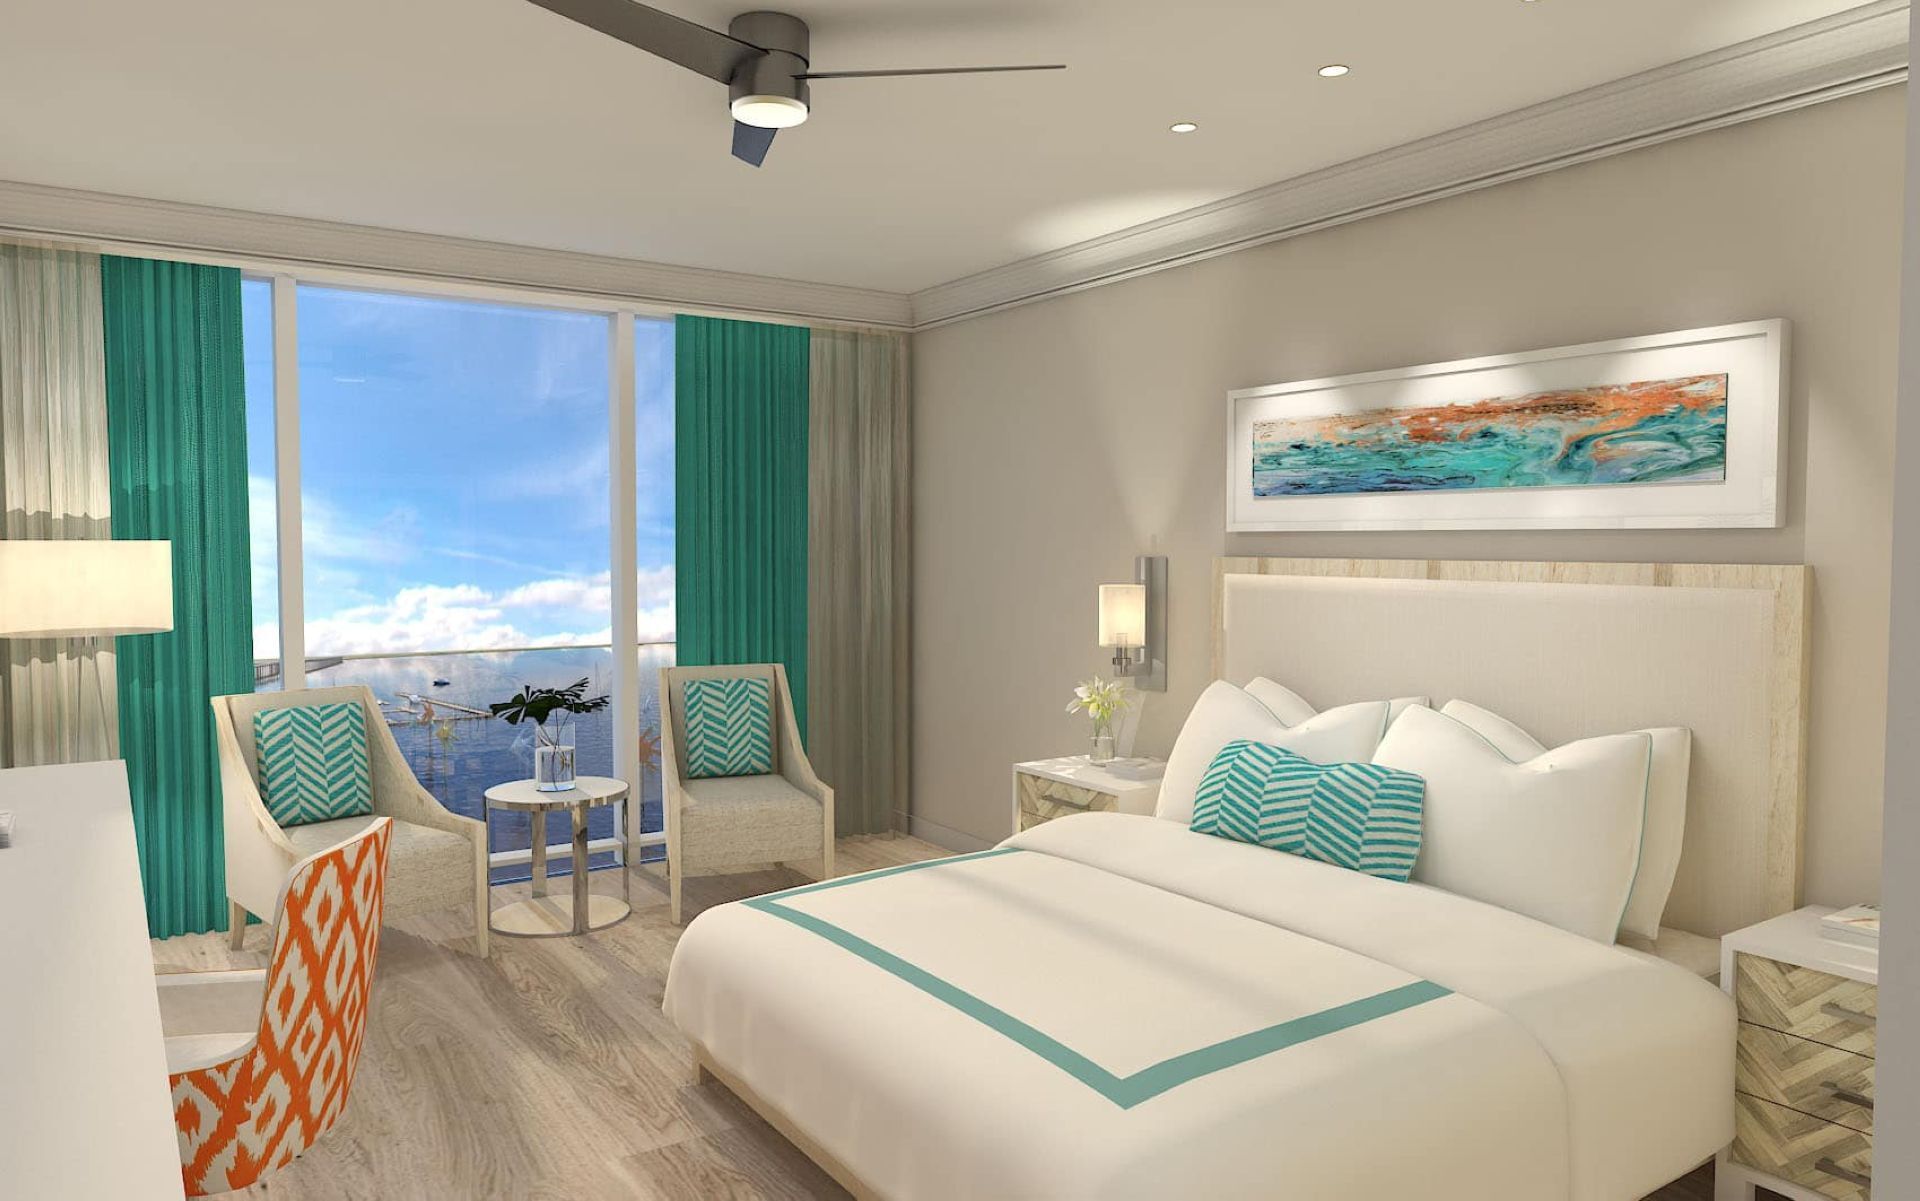 Interior of Stay king guest view bedroom at Sunseeker Resort